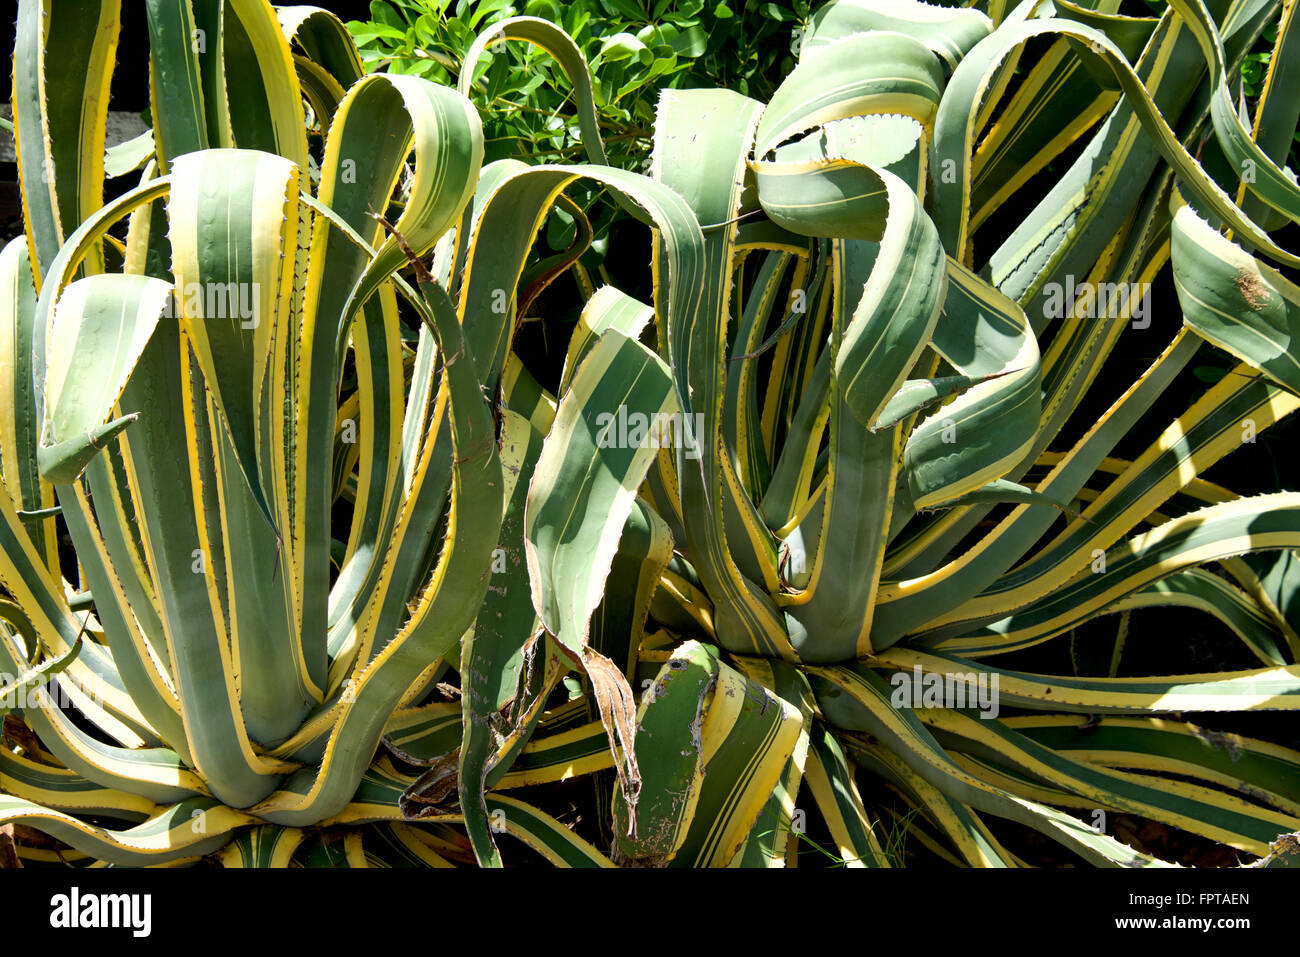 Agave succulent plant in bright green and yellow color. Stock Photo